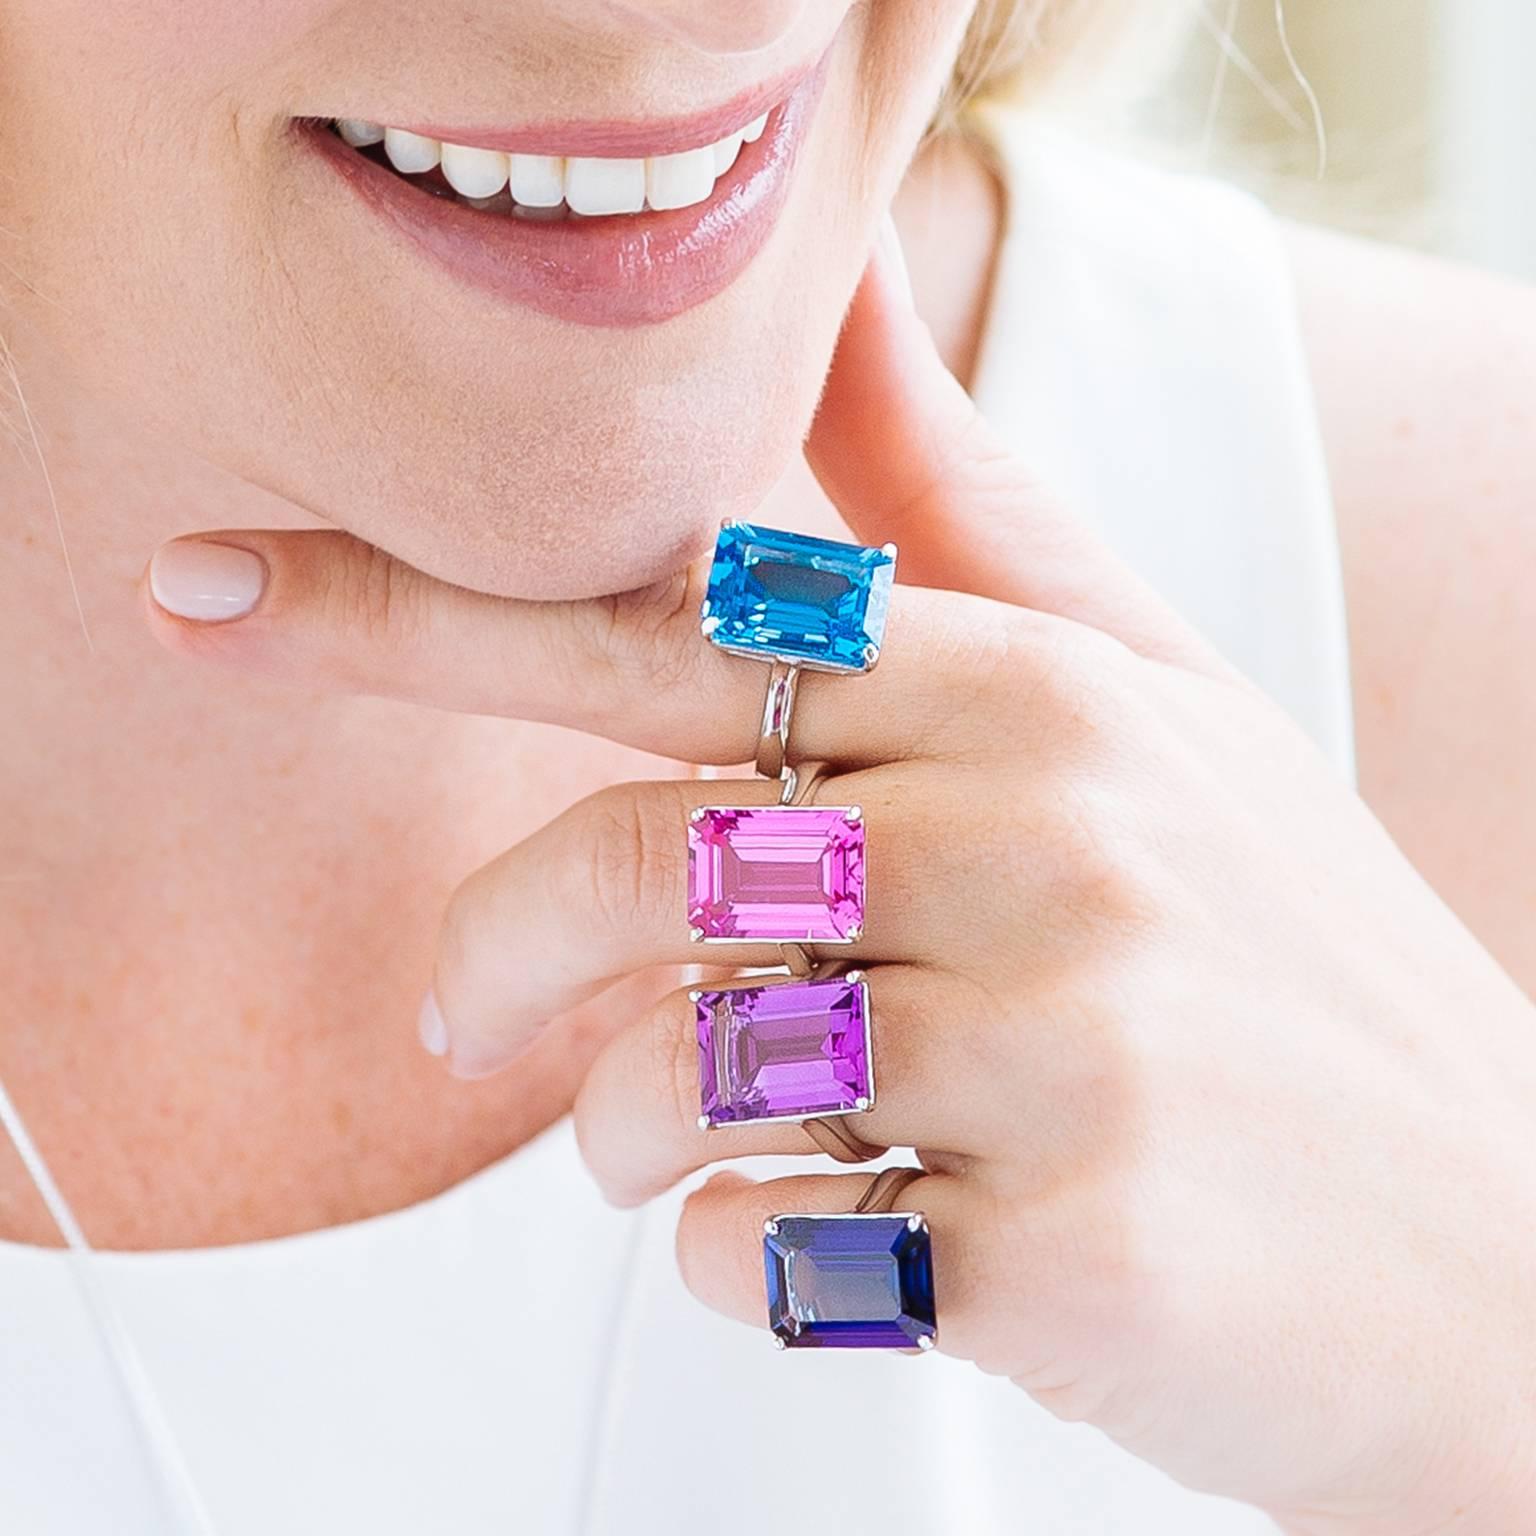 A modern classic, this emerald cut amethyst cocktail ring is guaranteed to gather compliments. The whiteness of the 9 carat white gold serves to enhance the deep regal tones of the amethyst, providing a highly wearable accessory for day or evening